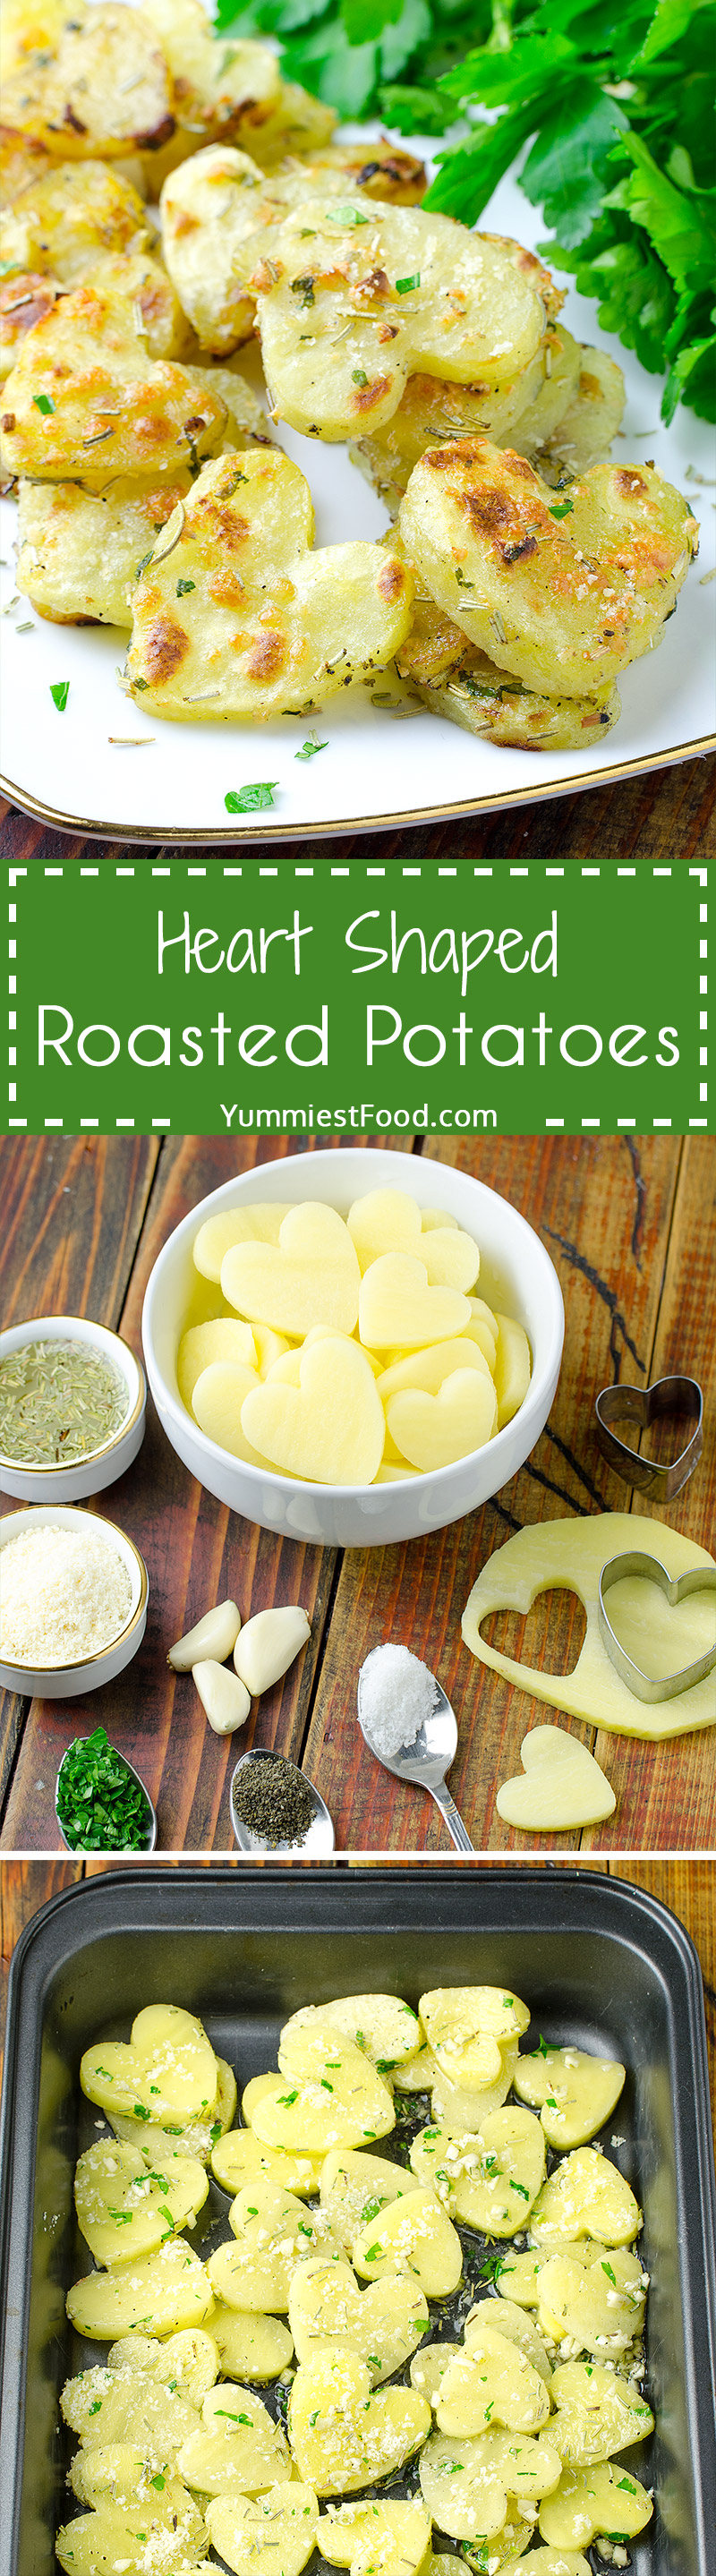 Heart Shaped Roasted Potatoes - A super quick and easy side dish